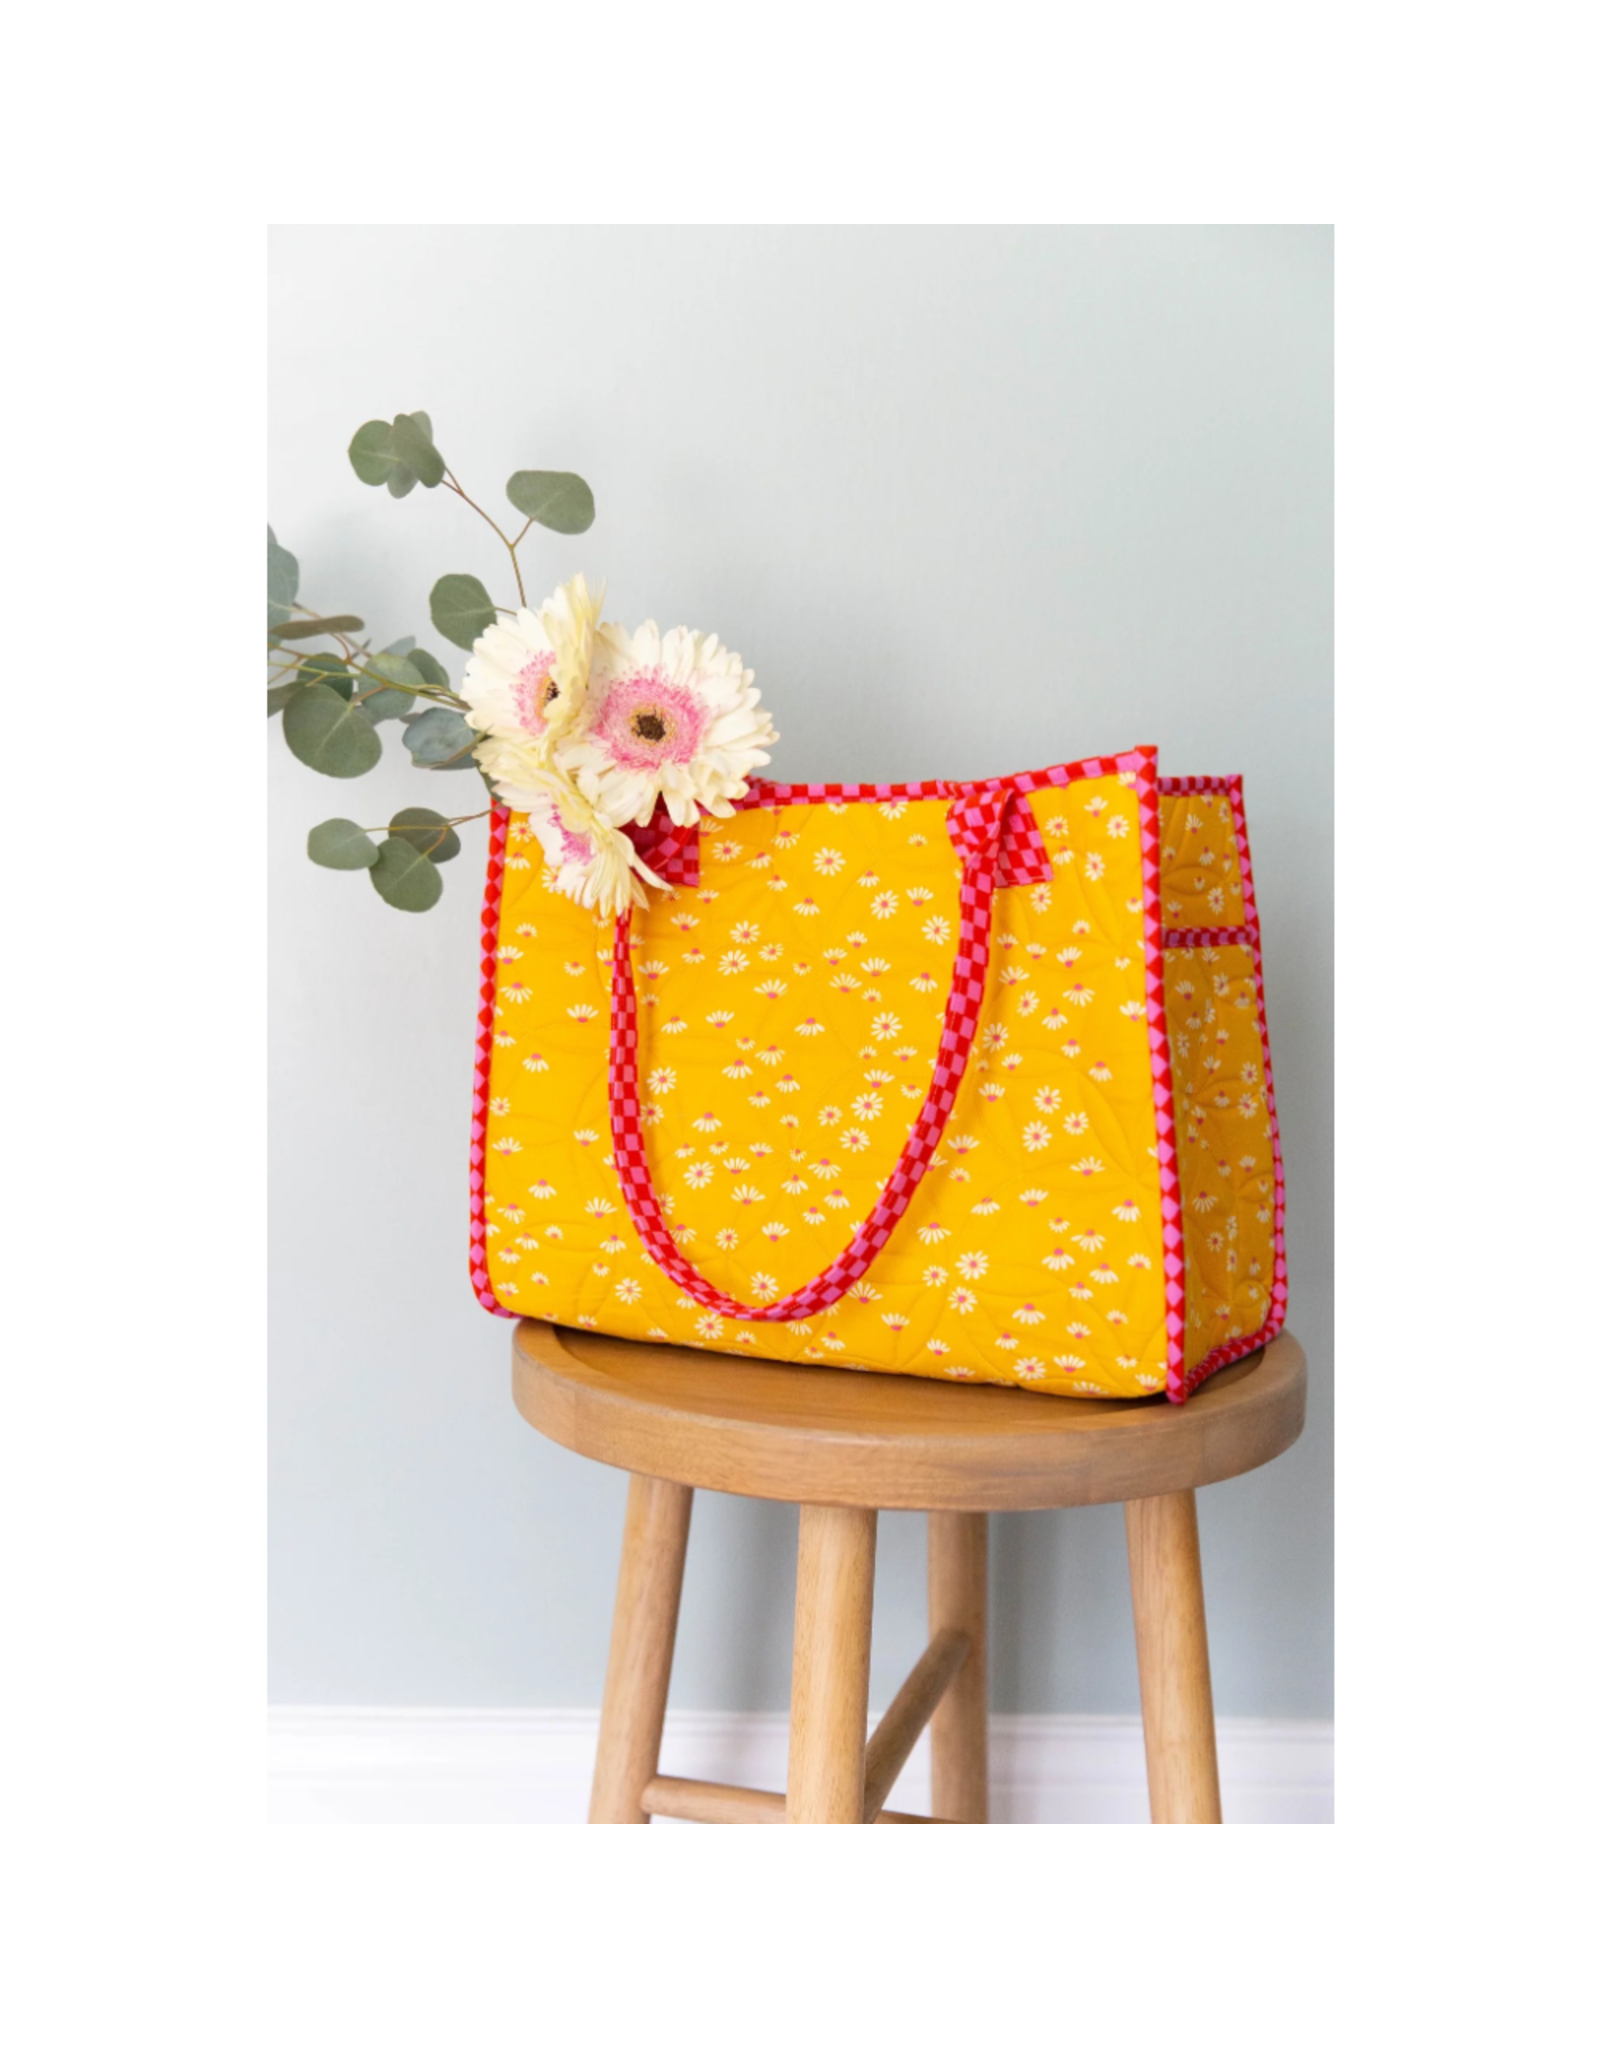 Knot + Thread All The Things Tote Bag Pattern